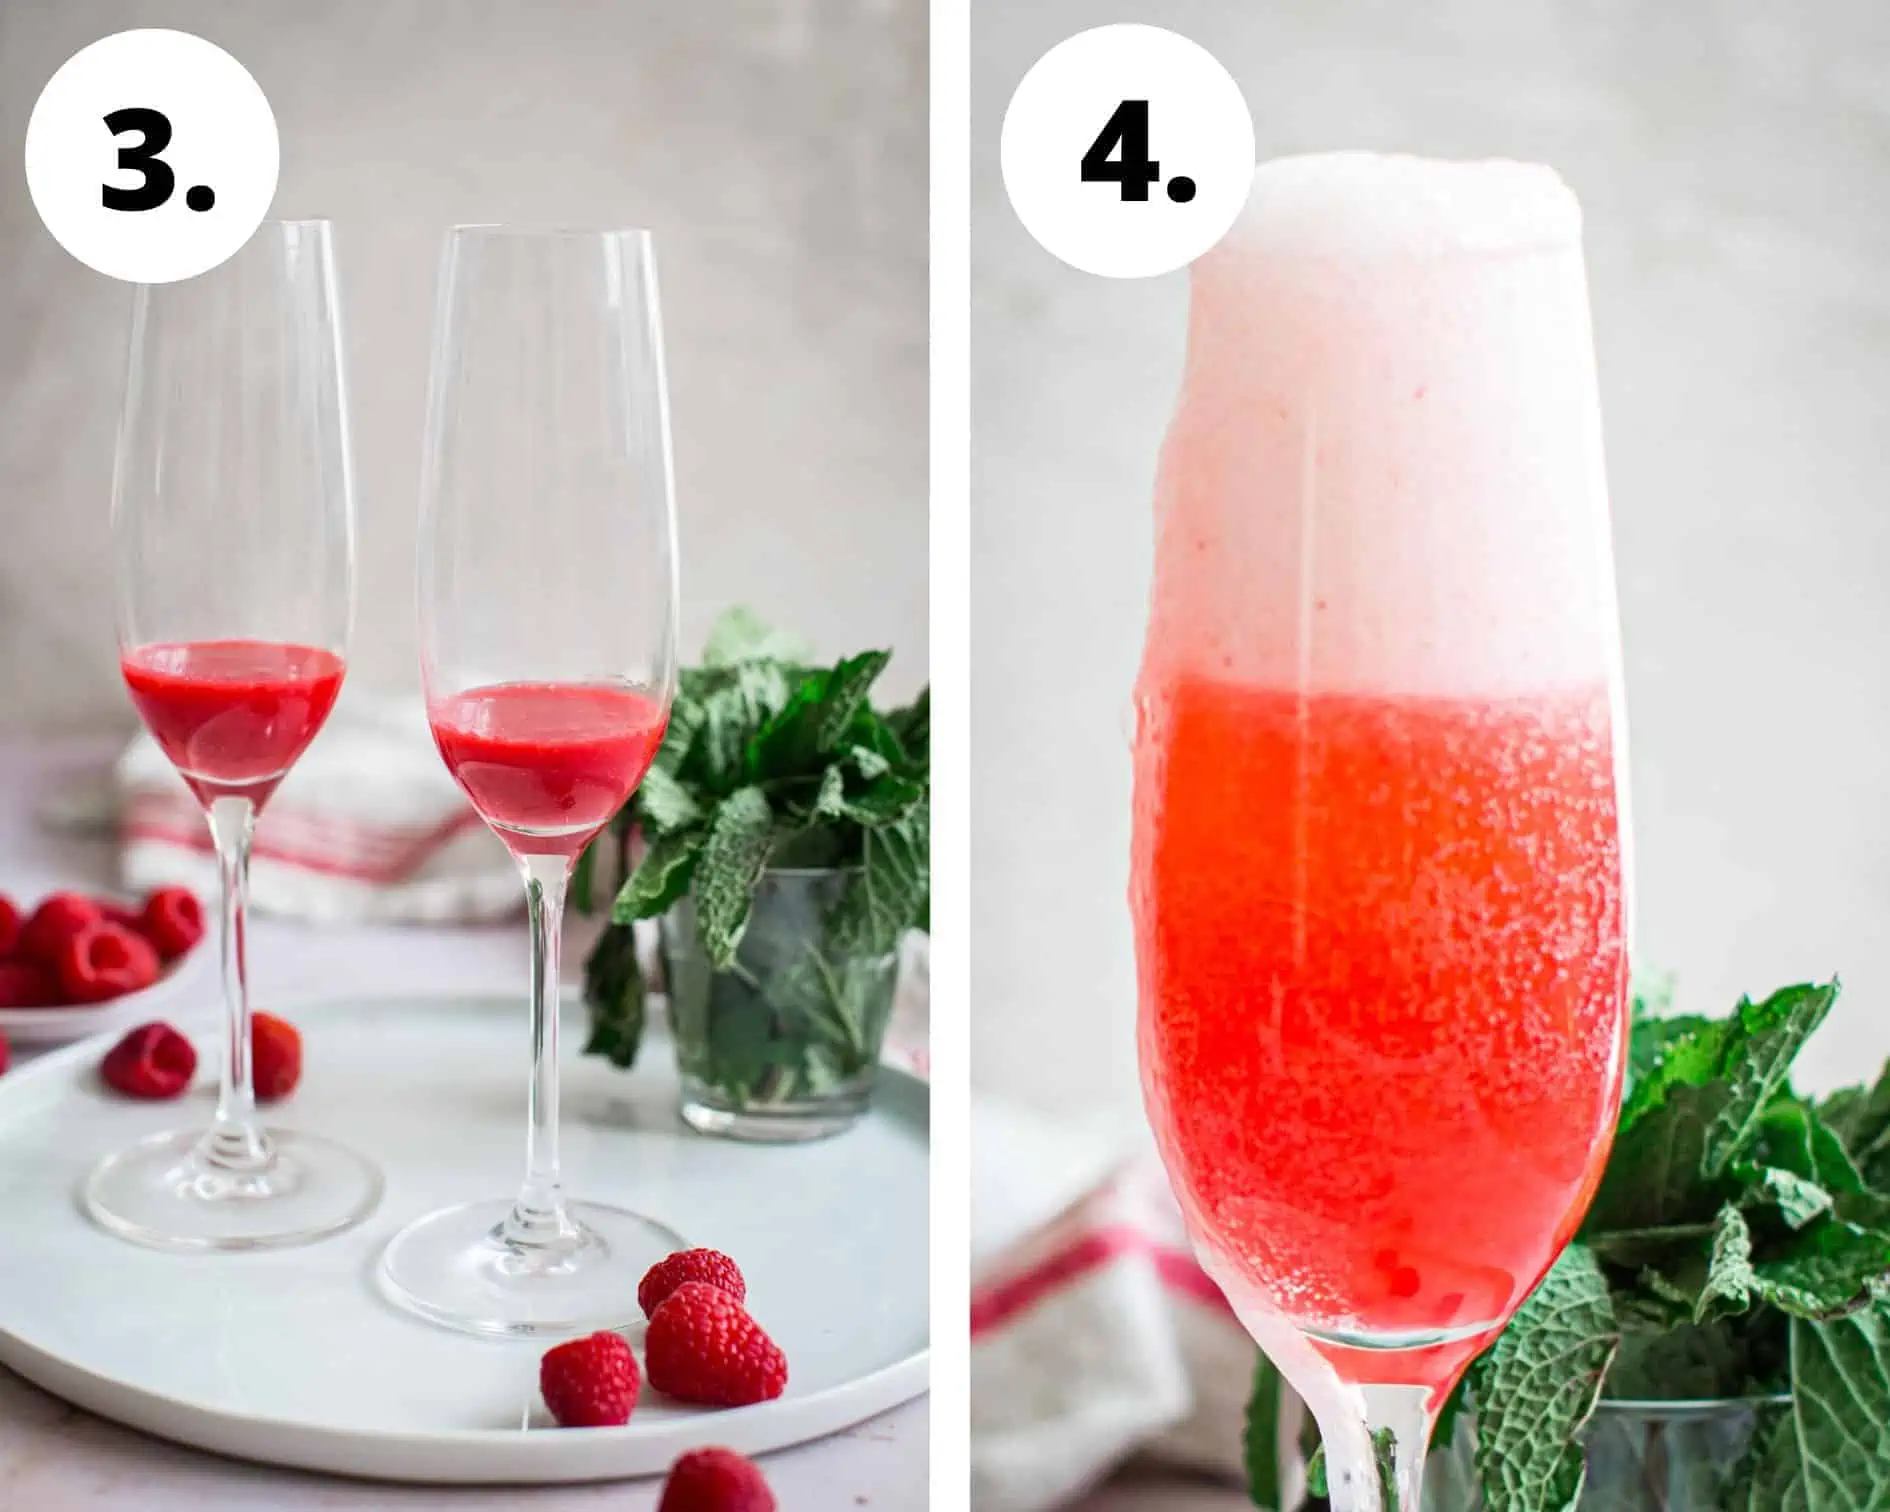 Raspberry bellini process steps 3 and 4.